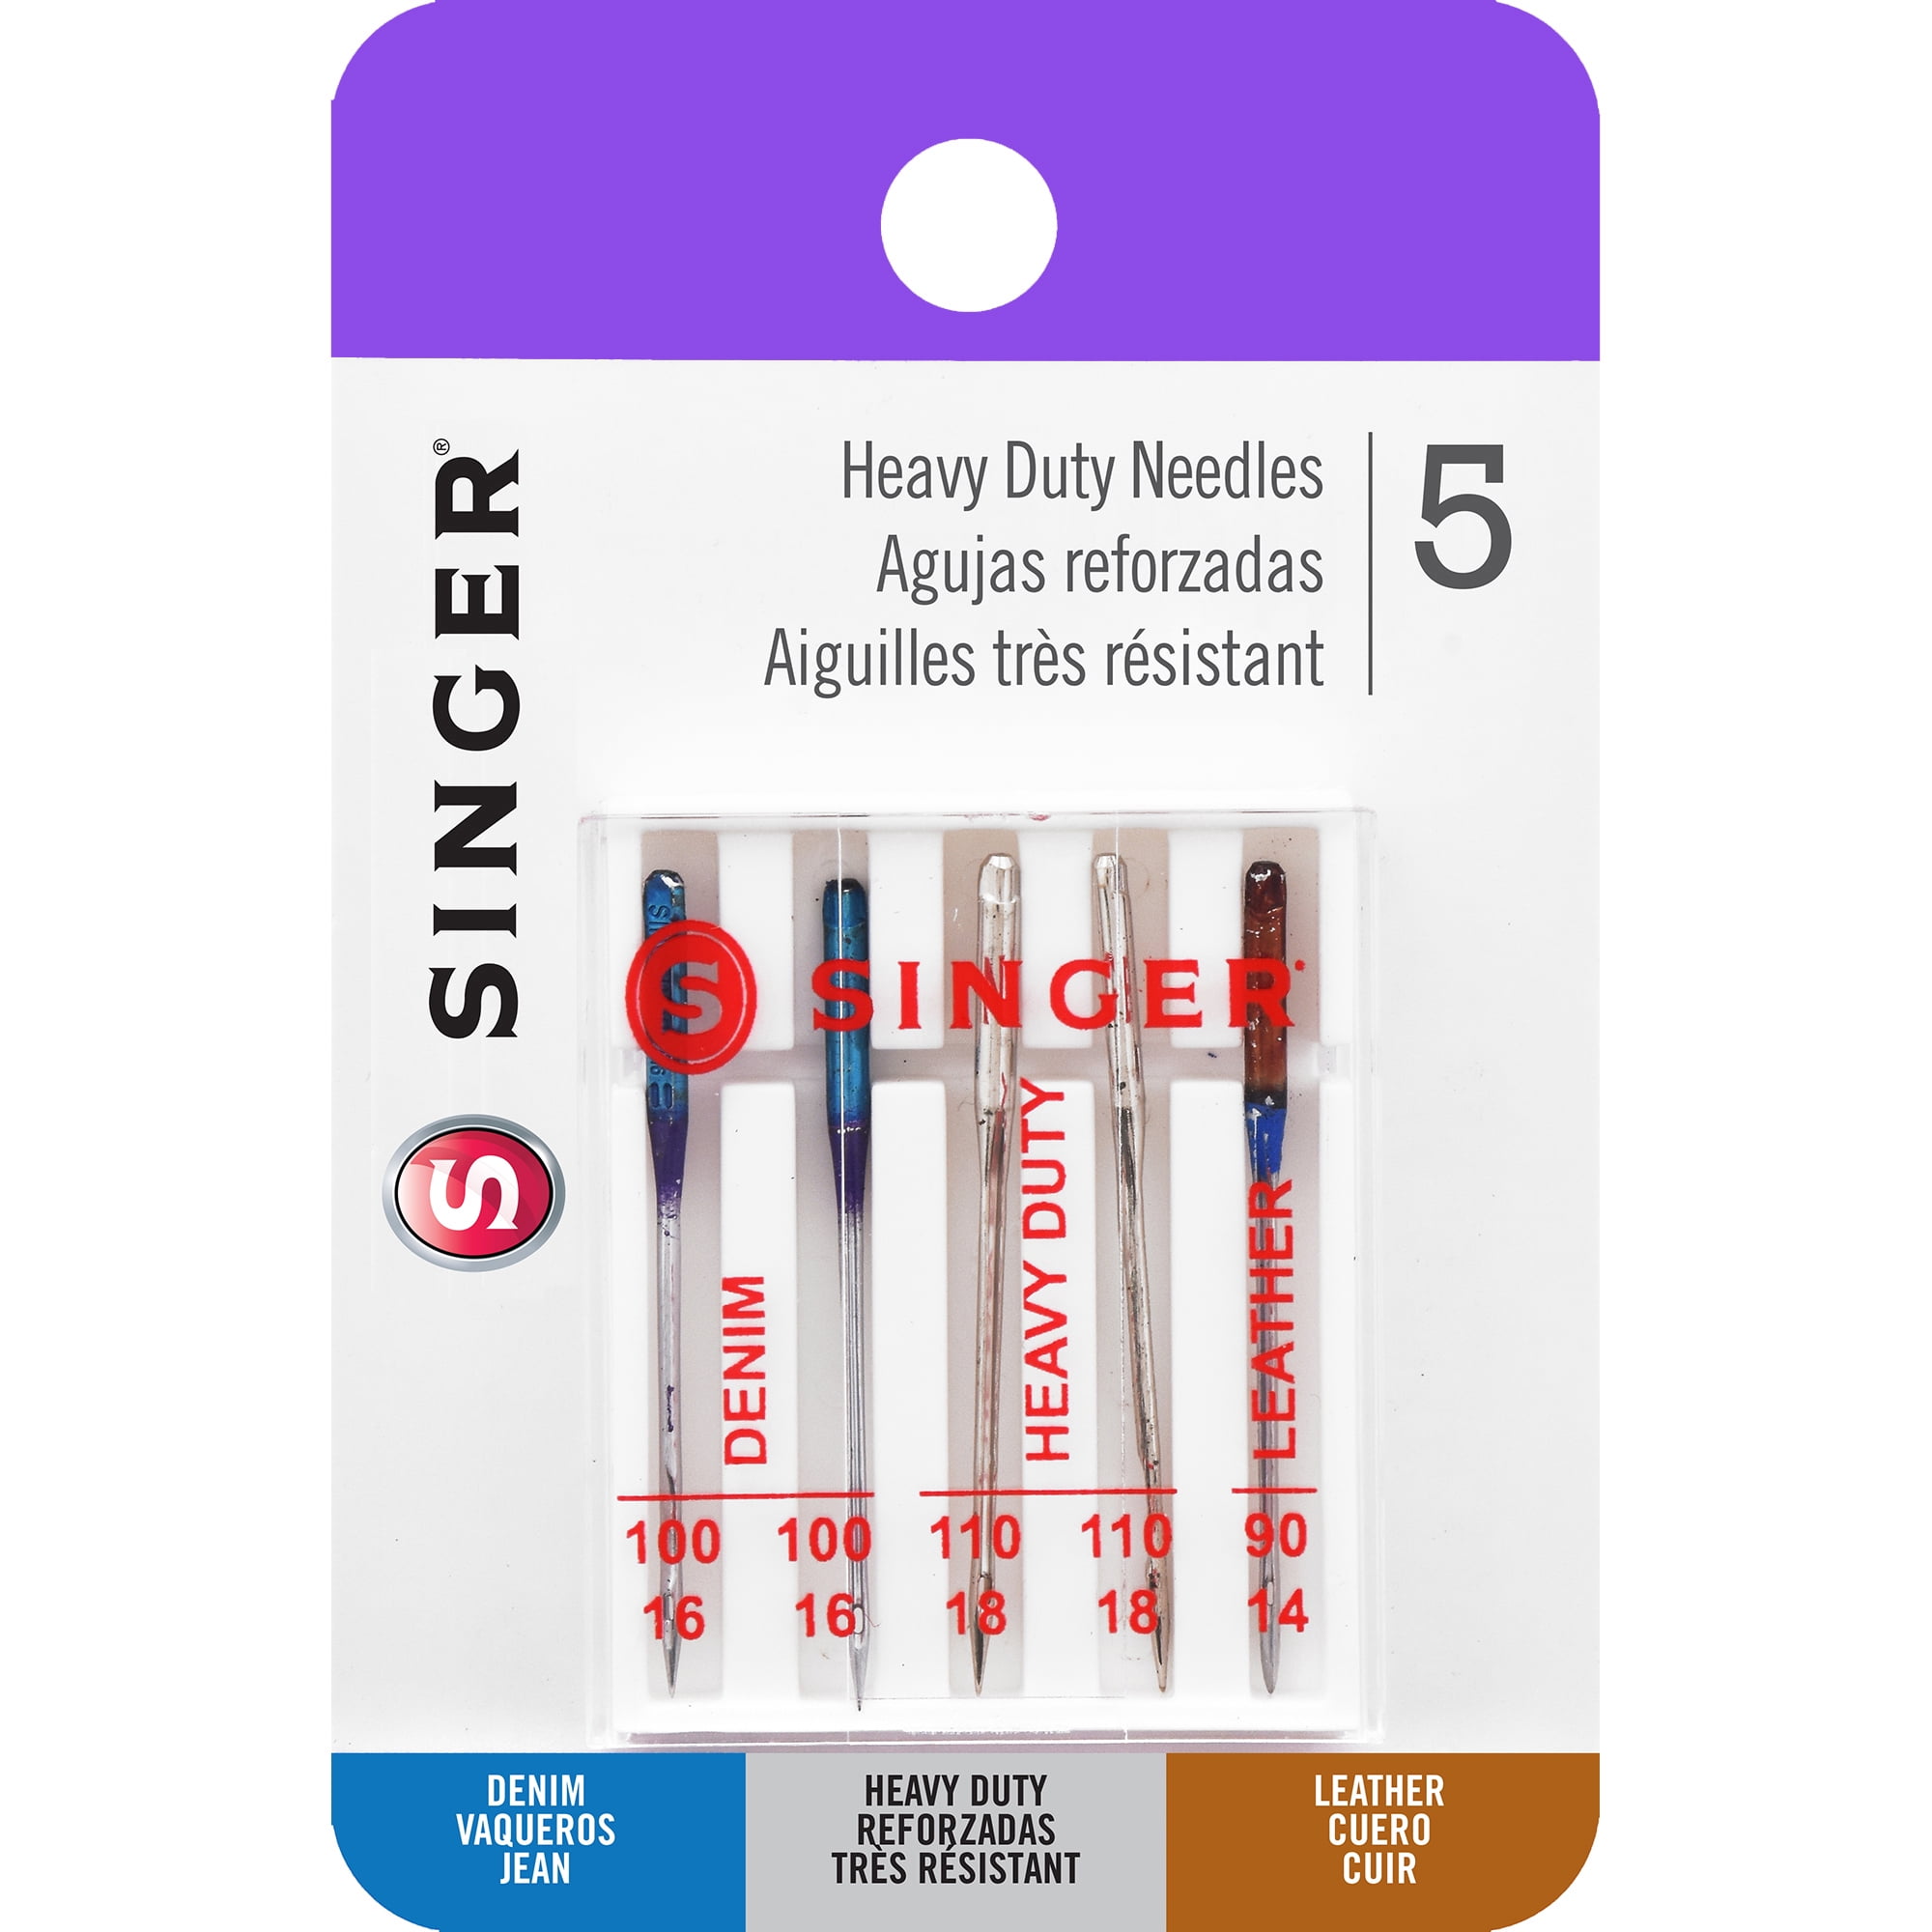 Singer 2108 3-Pack Flat Shank Denim Needles Size 100/16 For Home Sewing Machine 